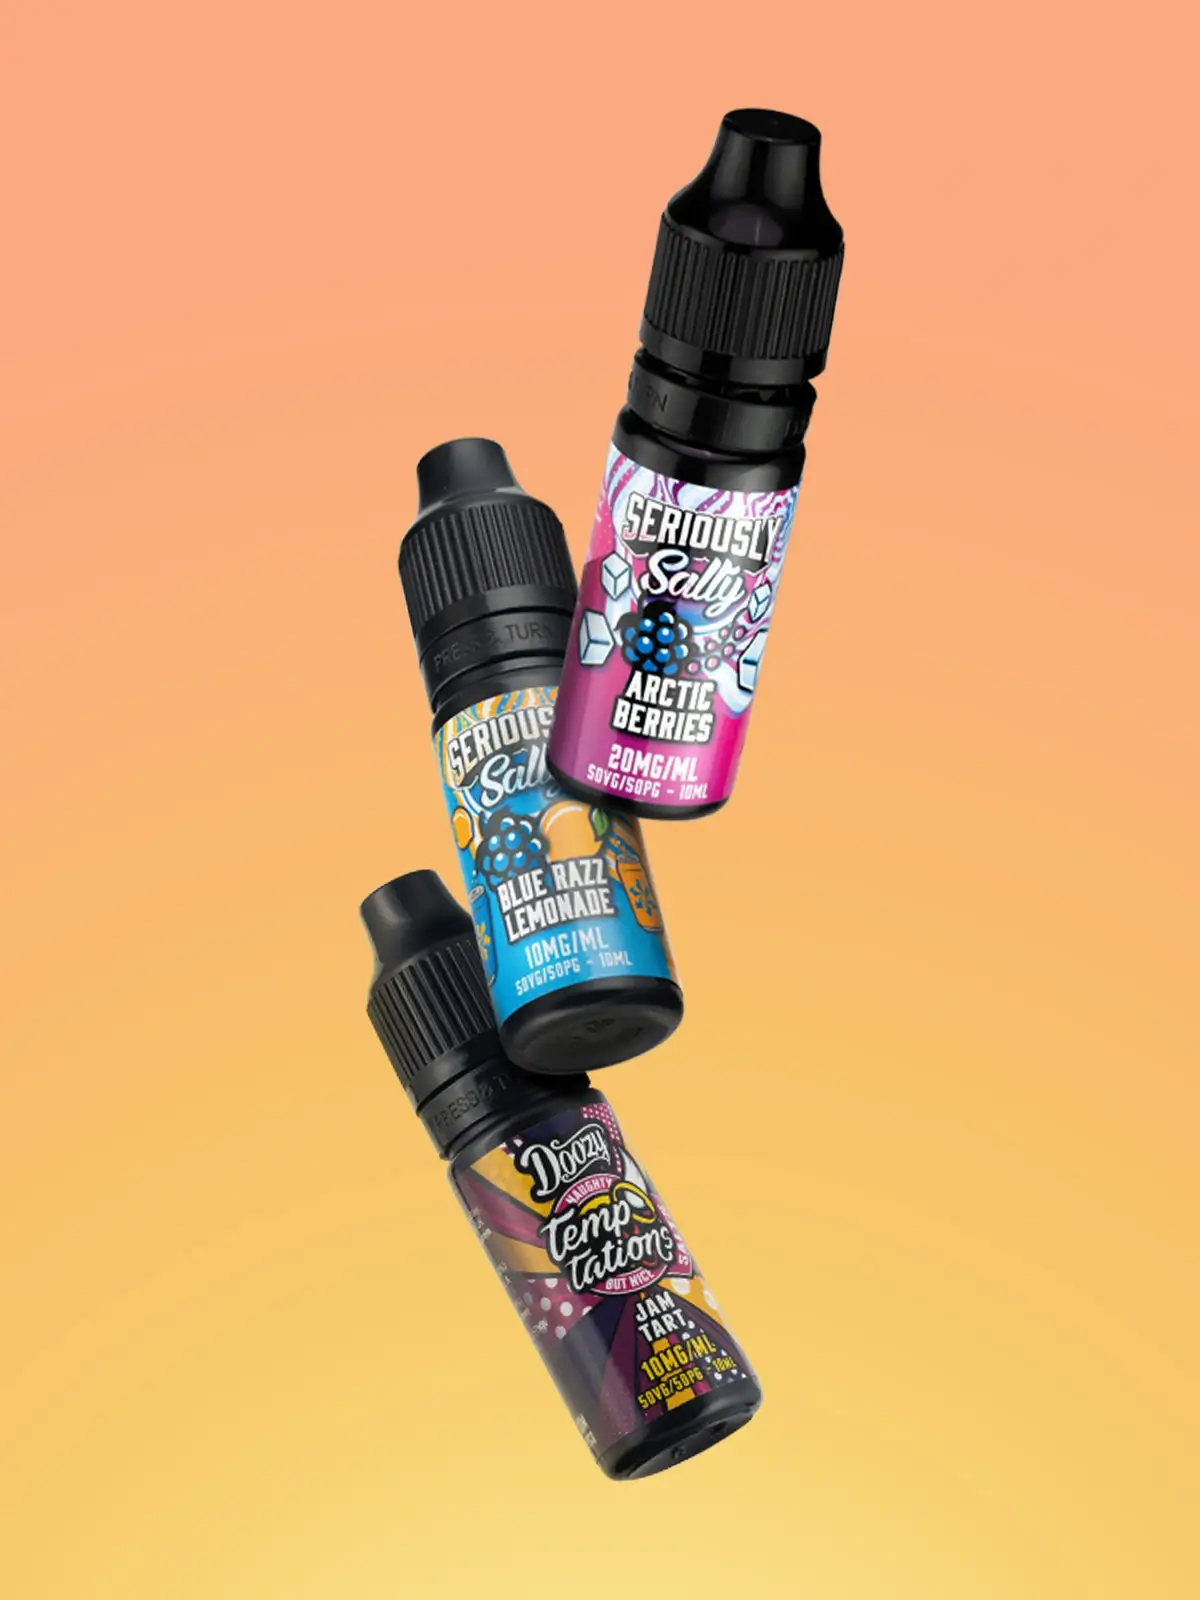 Three bottles of Doozy Vape e-liquid; Arctic Berries and Blue Razz Lemonade from the Seriously Salty collection and Jam Tart from the Doozy Temptations collection, floating in front of an orange and yellow background